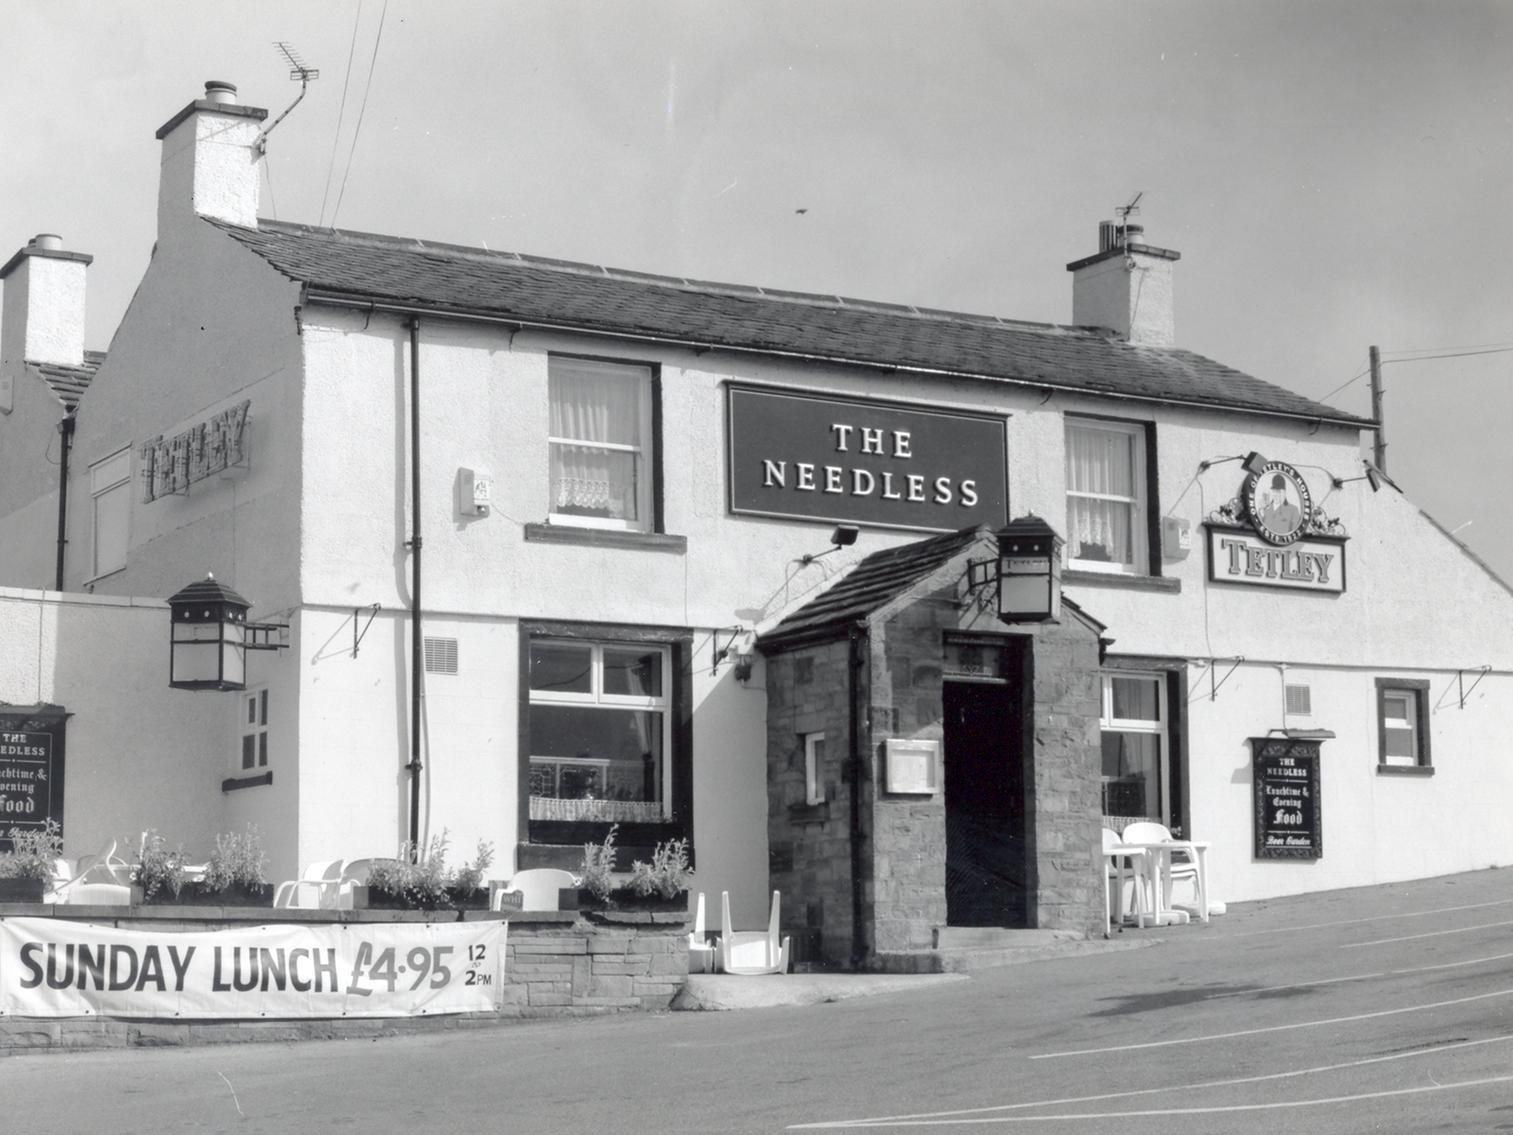 The Needless pub in the early 1990s. Did you pop in for Sunday lunch back in the day?